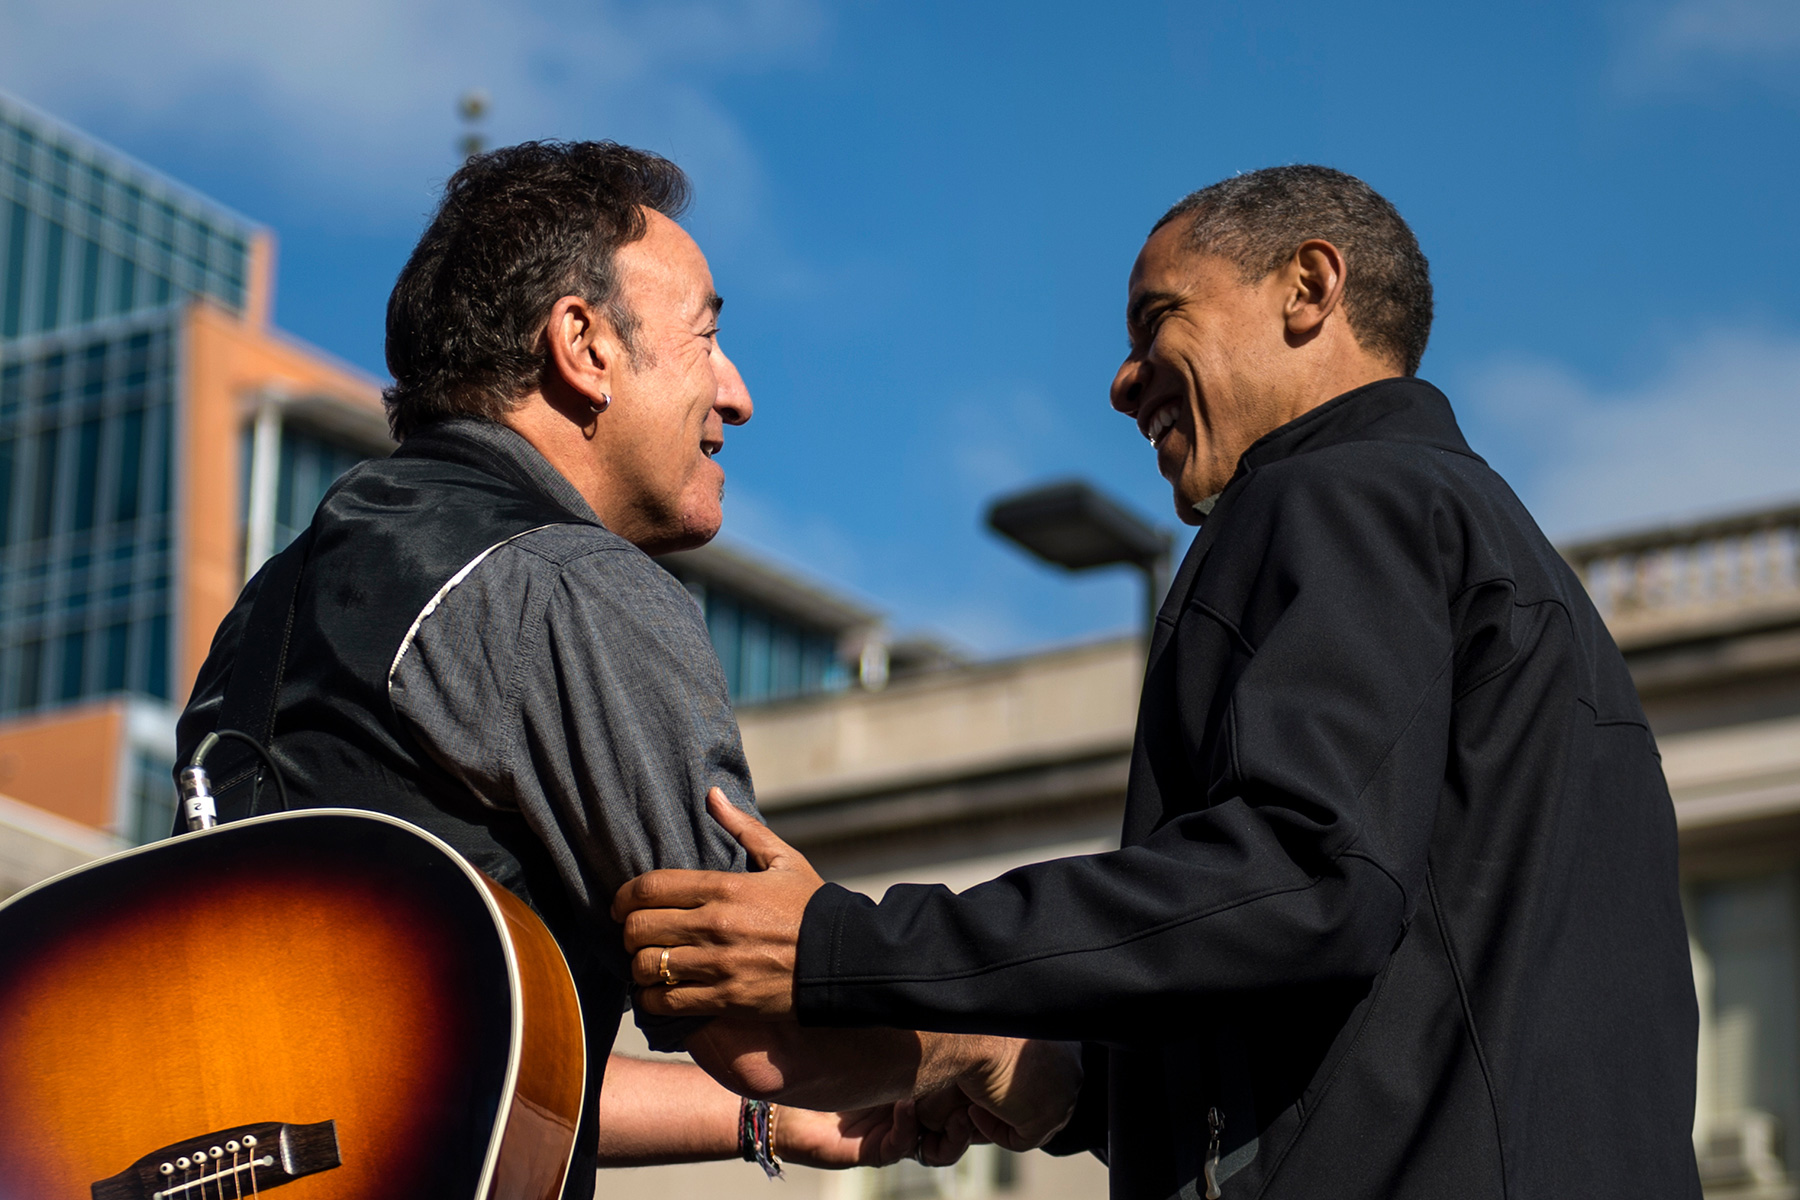 President Barack Obama and musician Bruce Springsteen share a moment, shaking hands, on the campaign trail in 2012